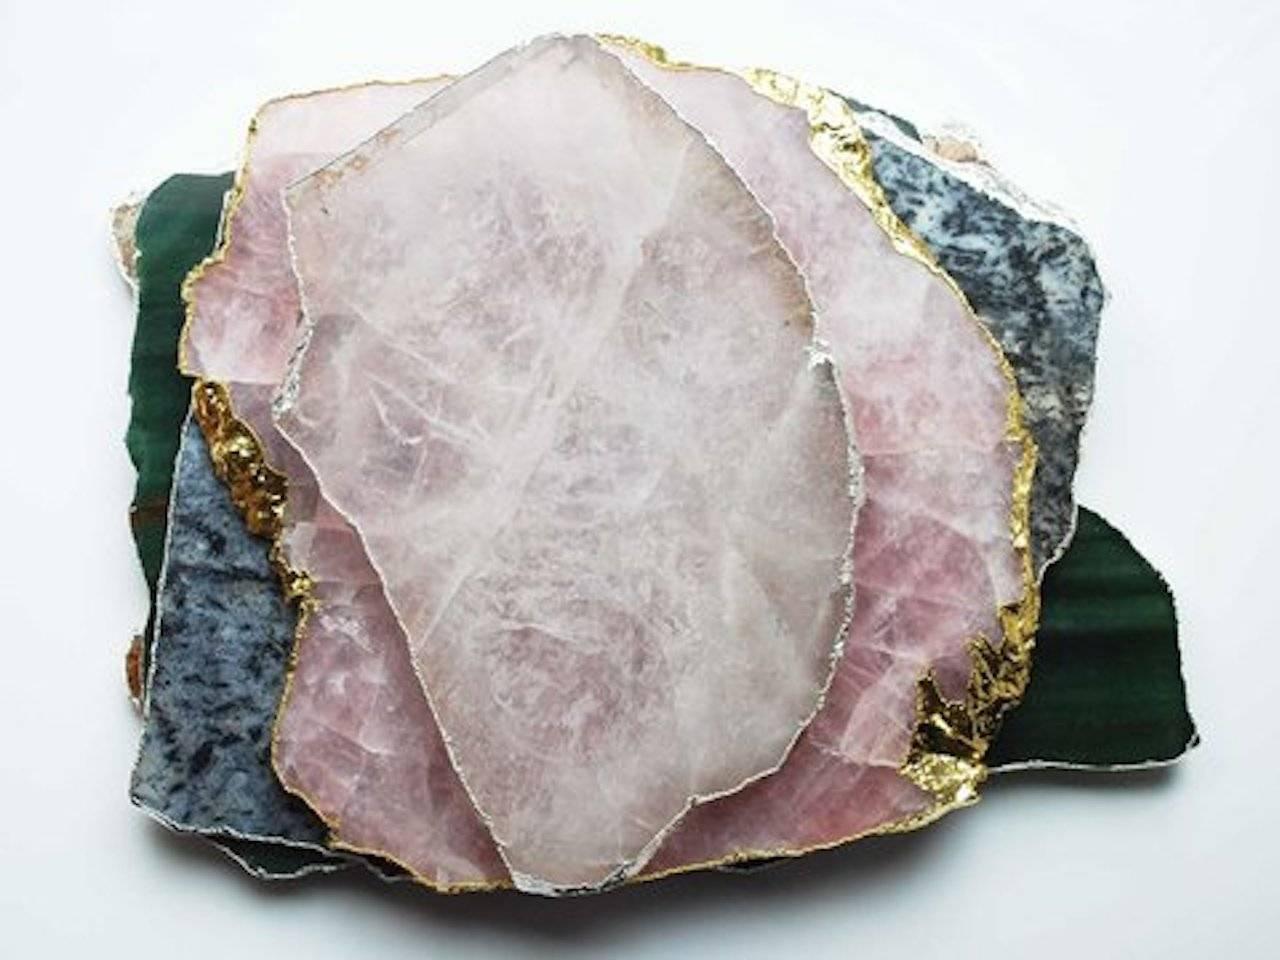 A handcrafted large rose quartz and gold platter which combines natural stone with 24-karat gold. Master craftsmen in Brazil hand polish the rare stones, contouring each natural edge with precious metal. The platter is scratch resistant with rubber